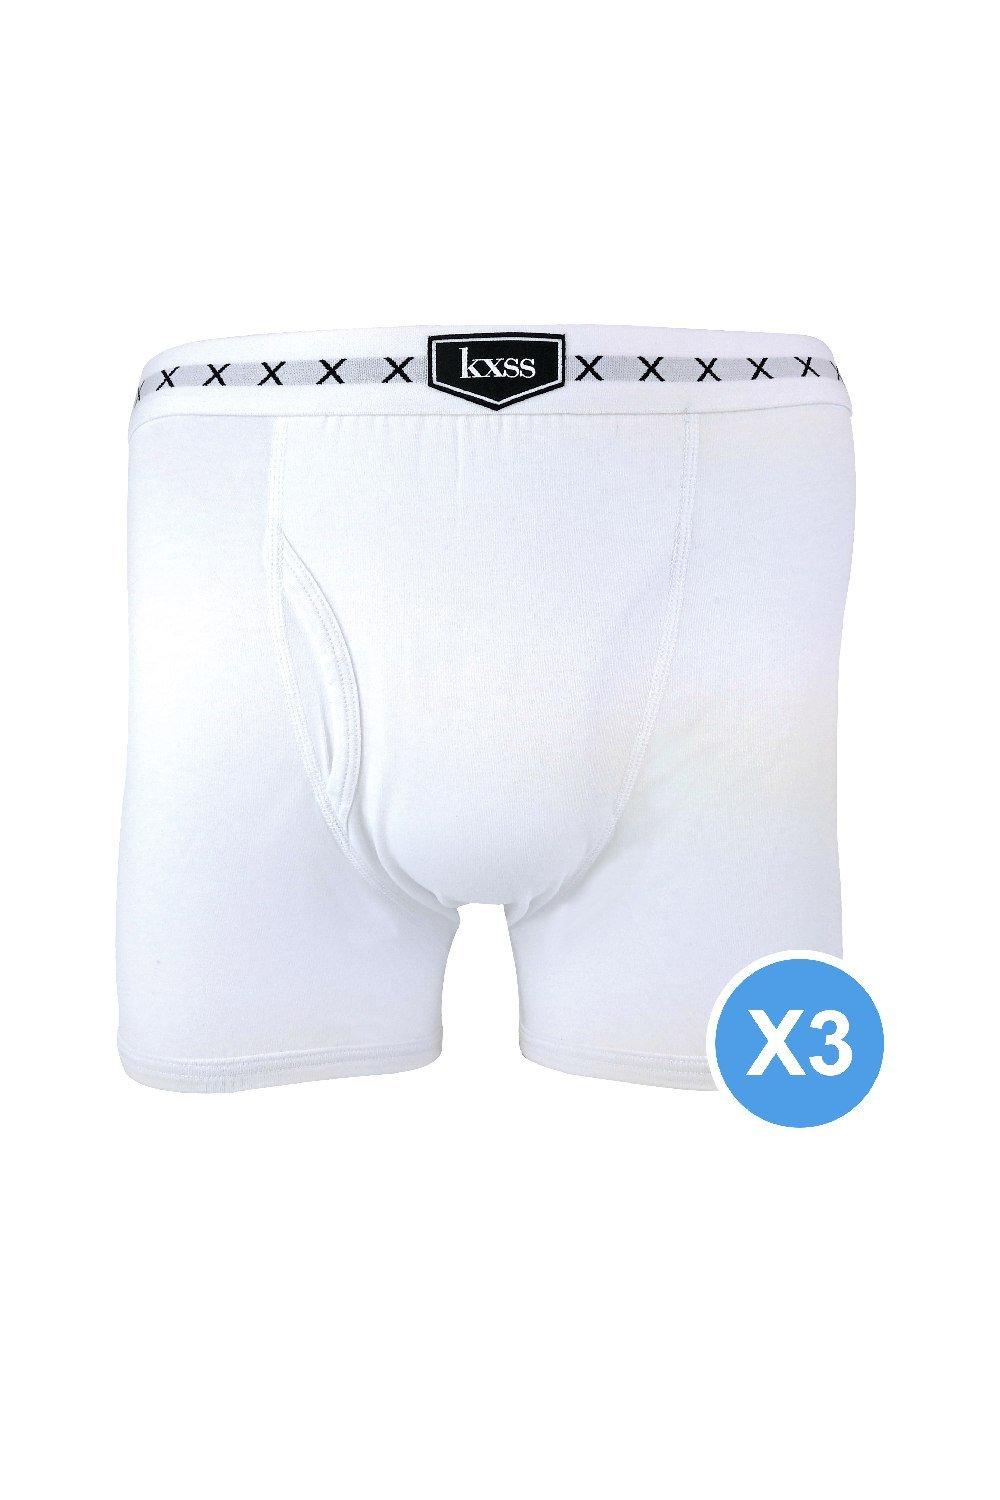 3 Pair Multipack Cotton Rich Trunks in 2 Colours